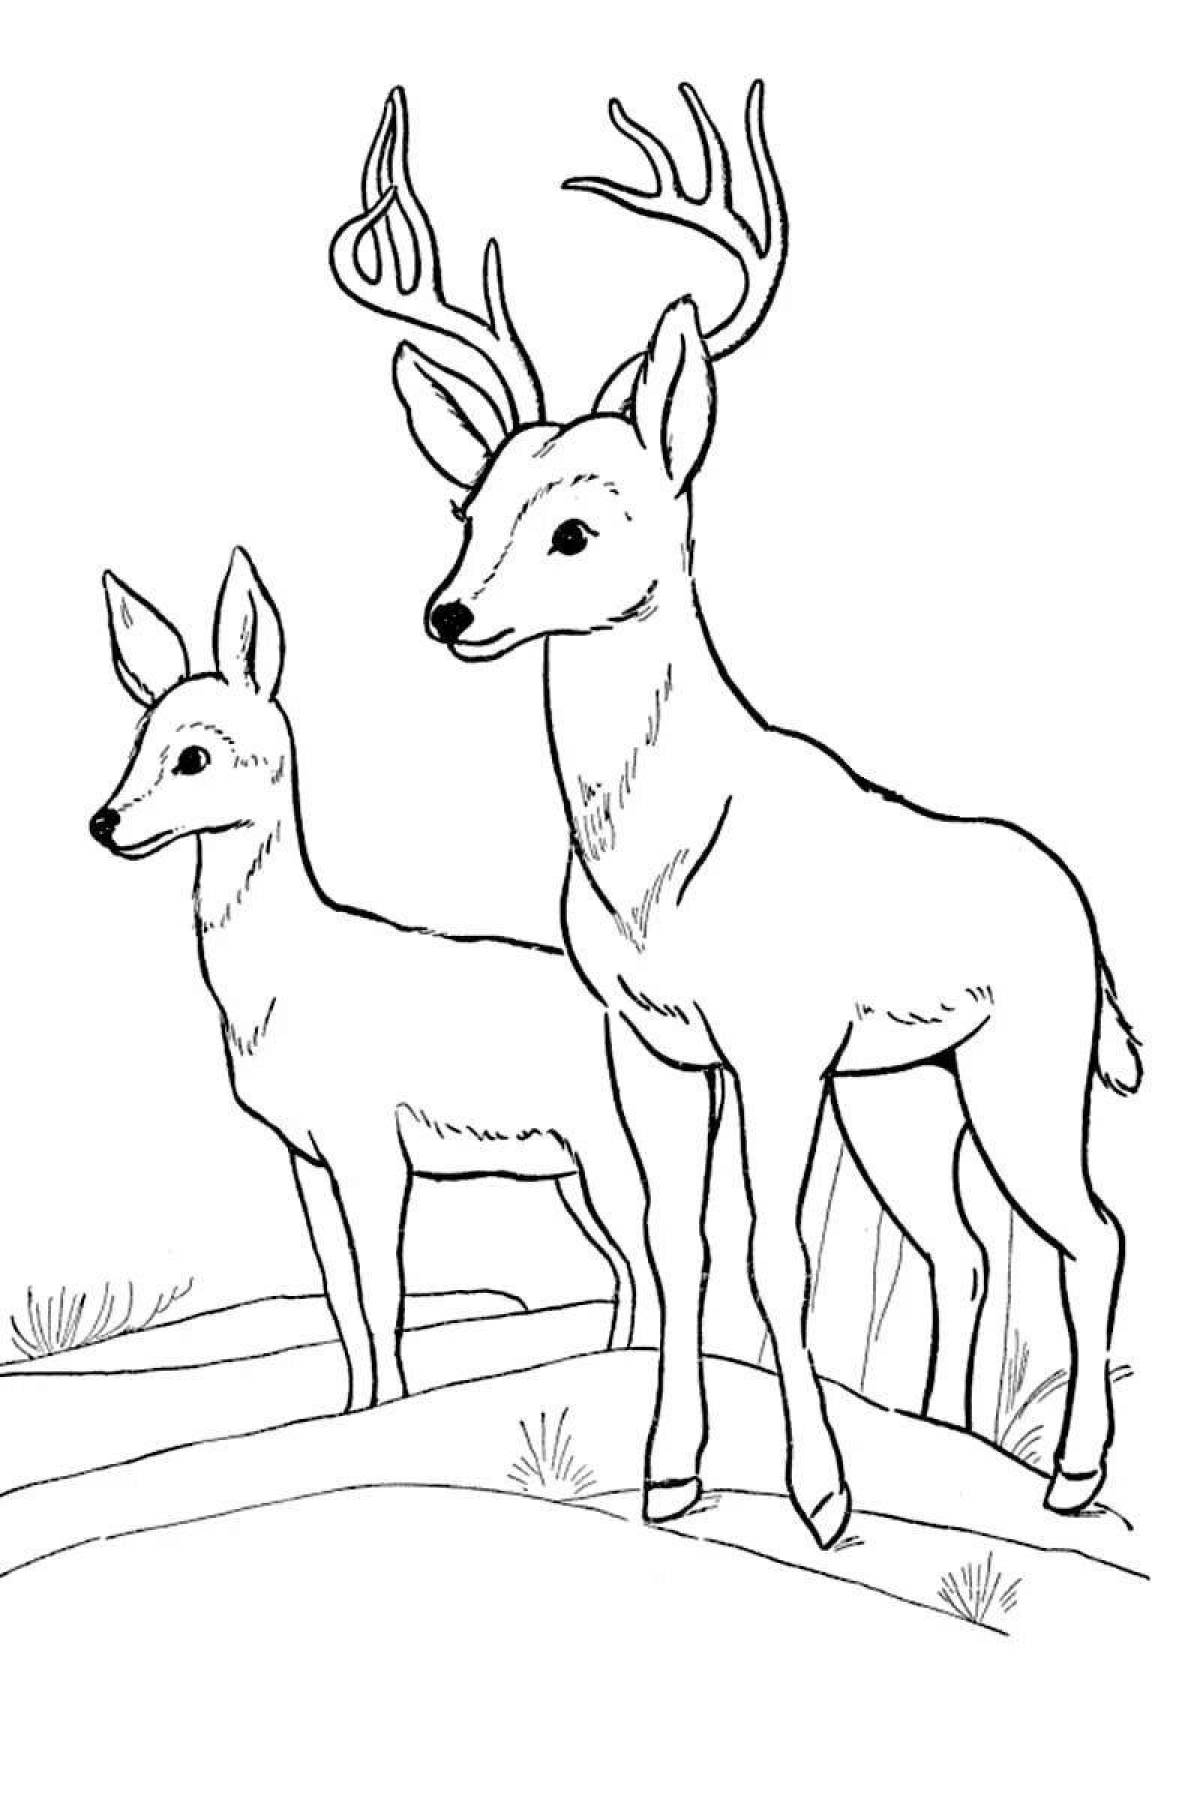 Great deer coloring book for kids 6-7 years old